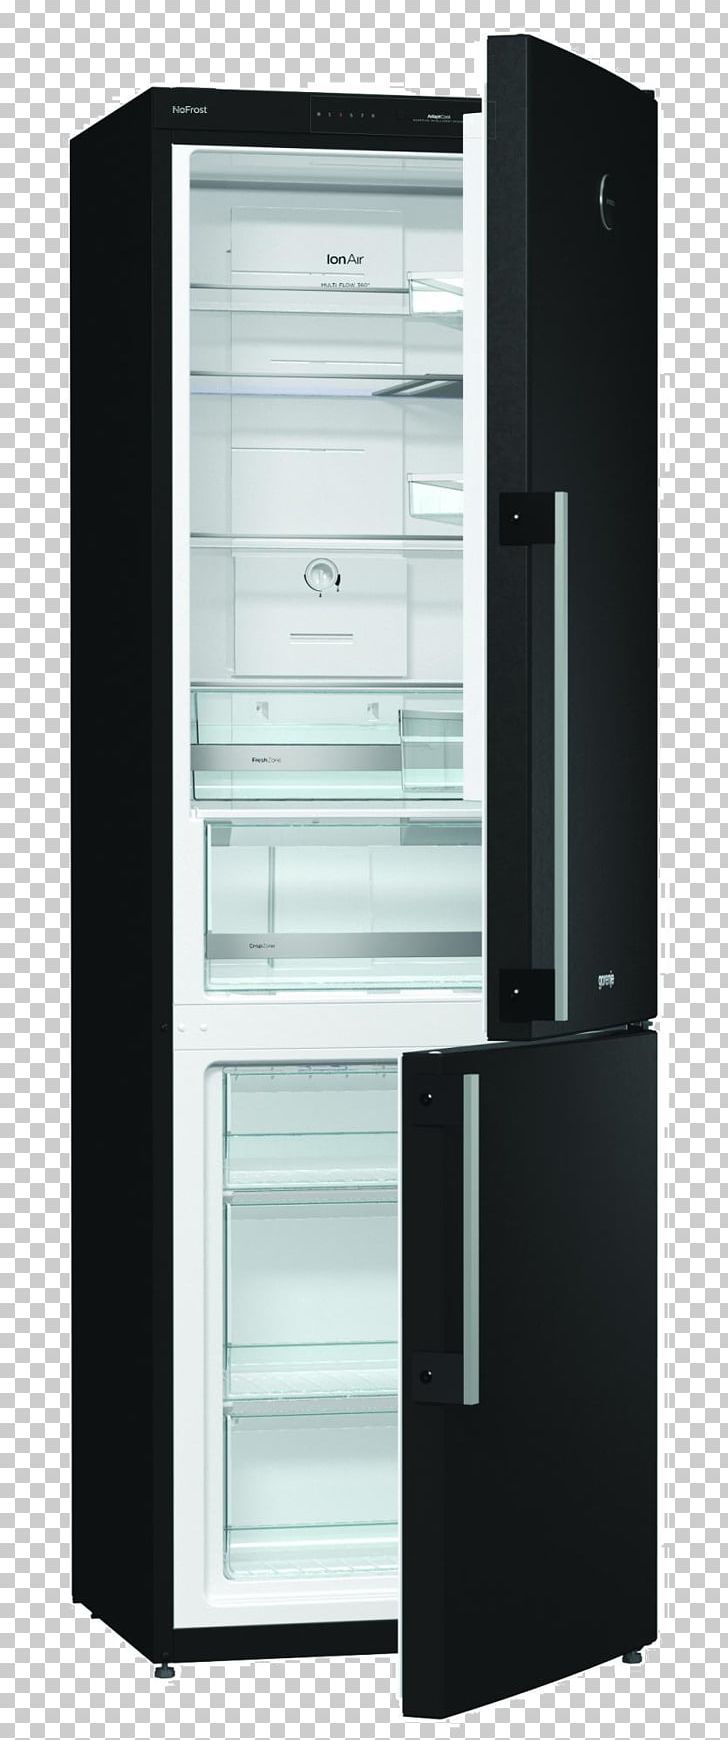 Refrigerator Freezers Gorenje Home Appliance European Union Energy Label PNG, Clipart, Appliances Online, Electronics, European Union Energy Label, Filing Cabinet, Freezers Free PNG Download